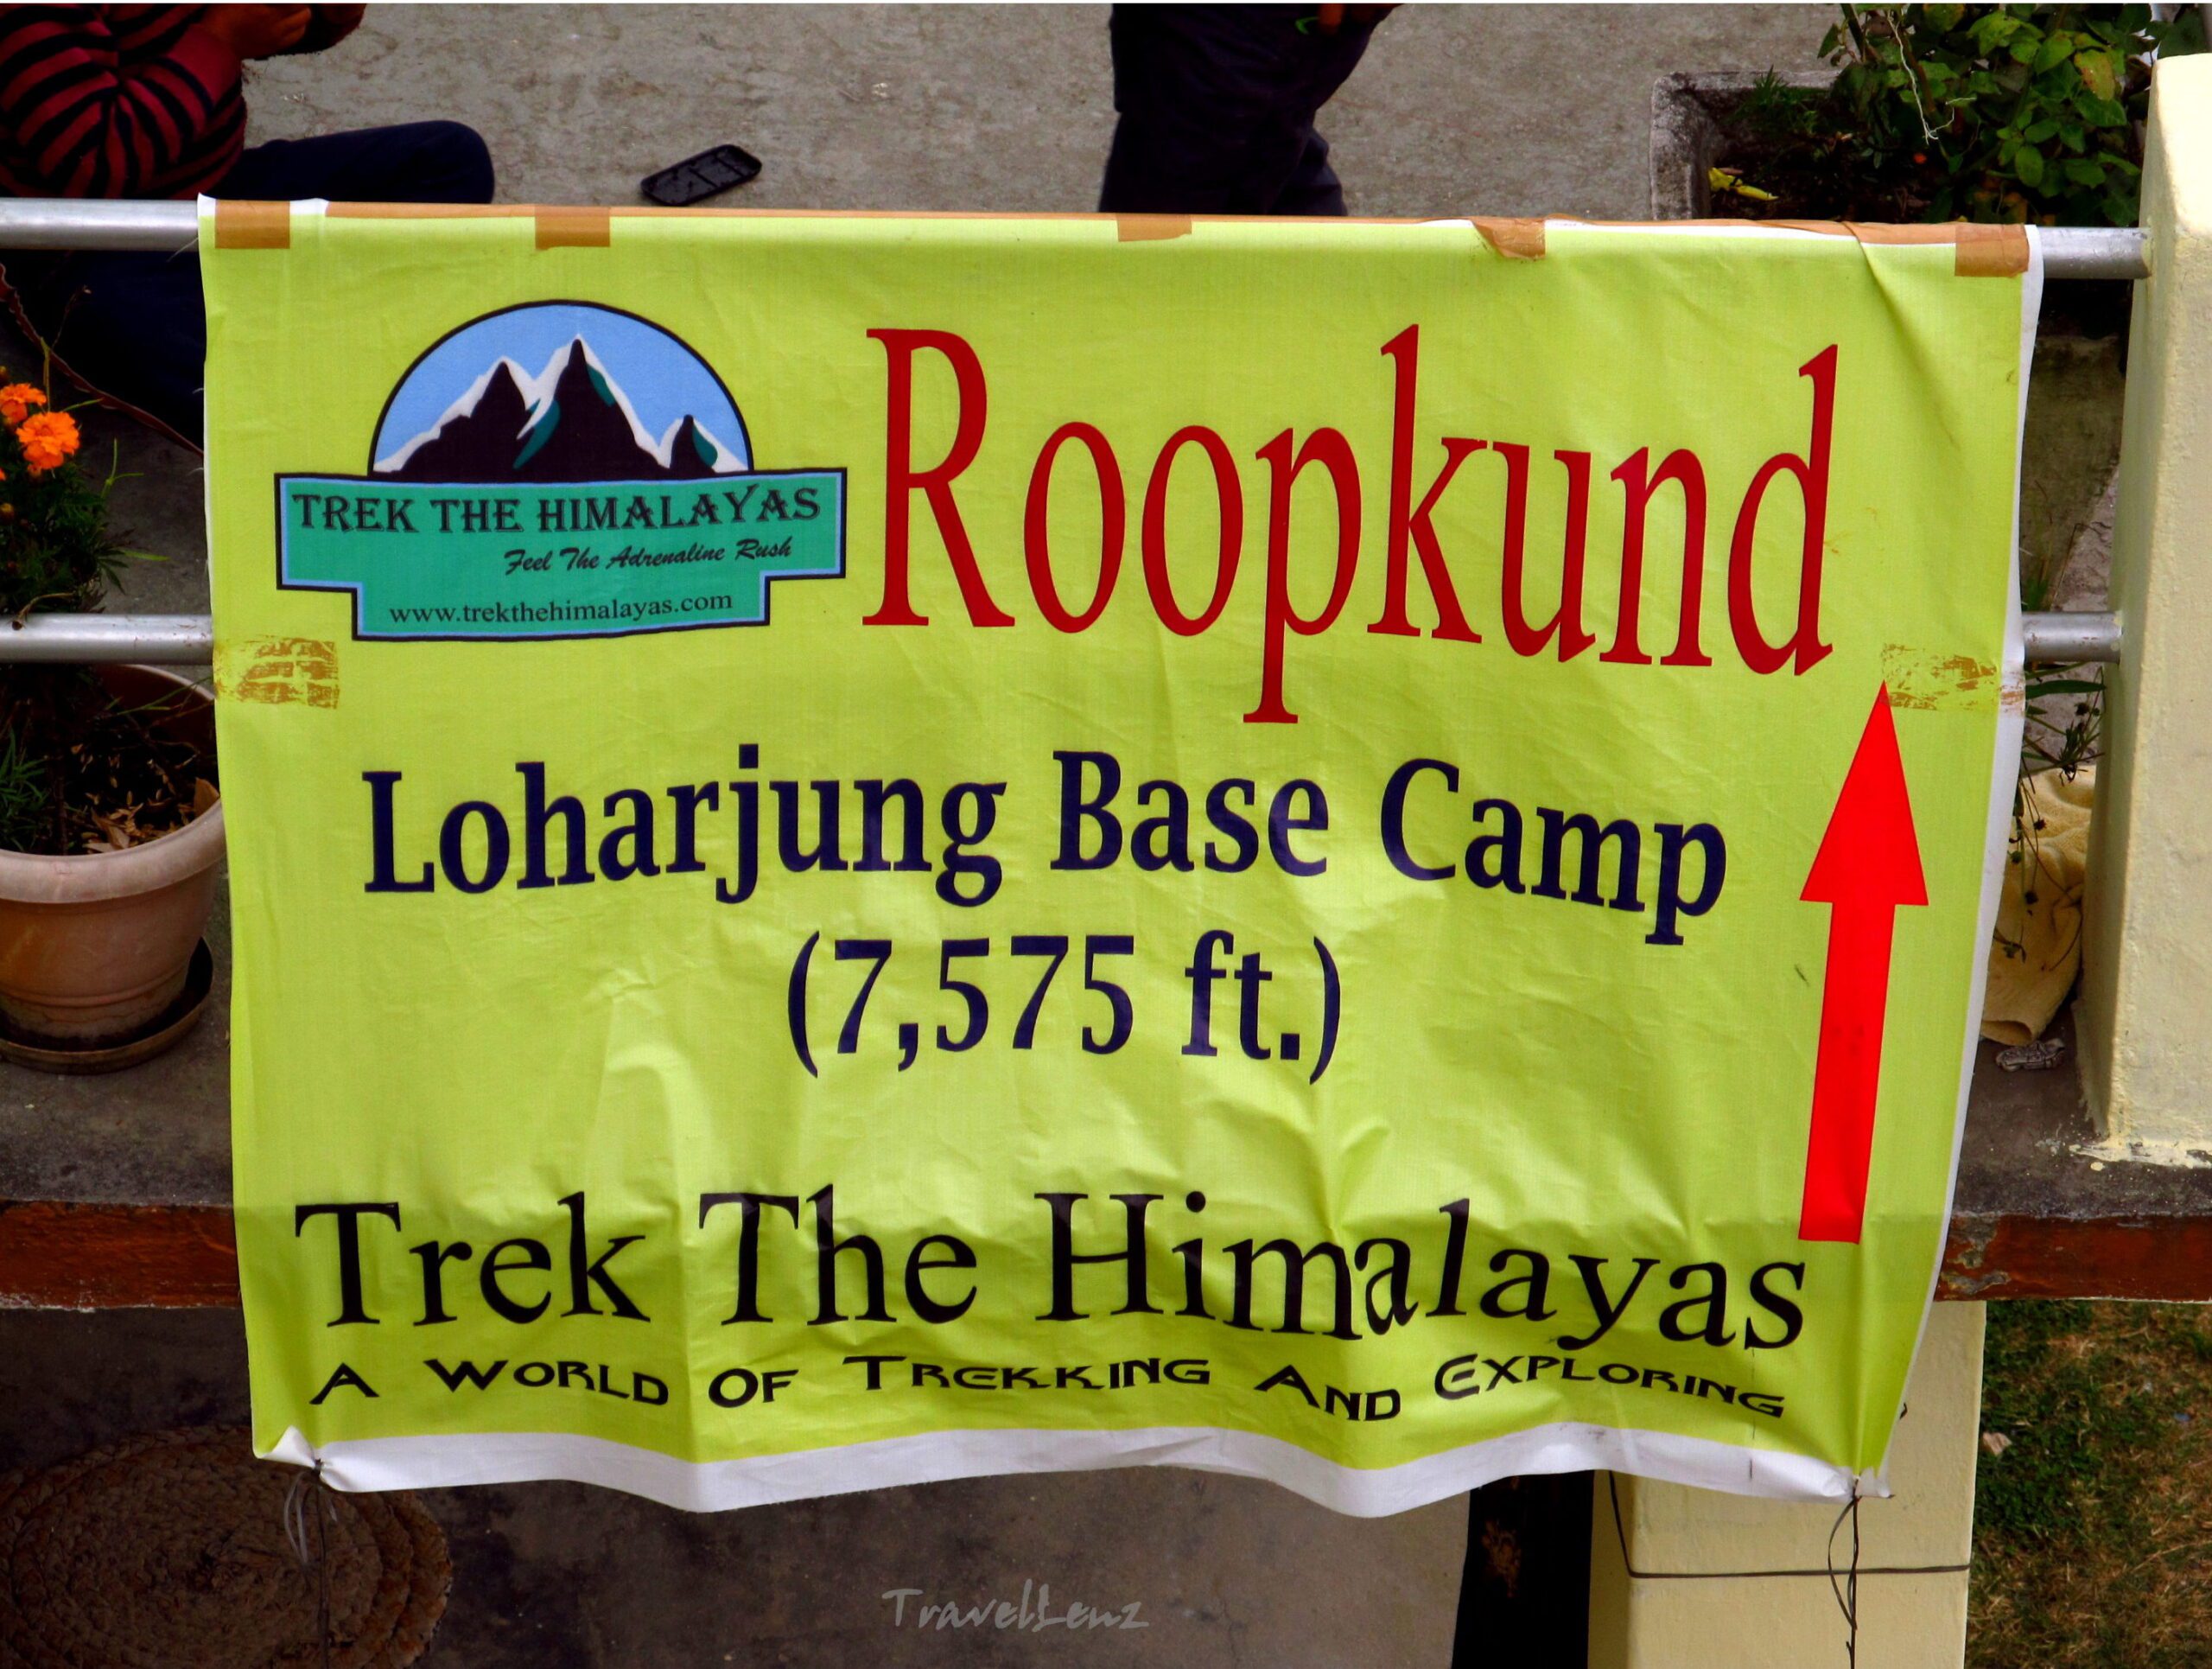 Poster showing altitude of the Lohajung base camp at 7575 feet